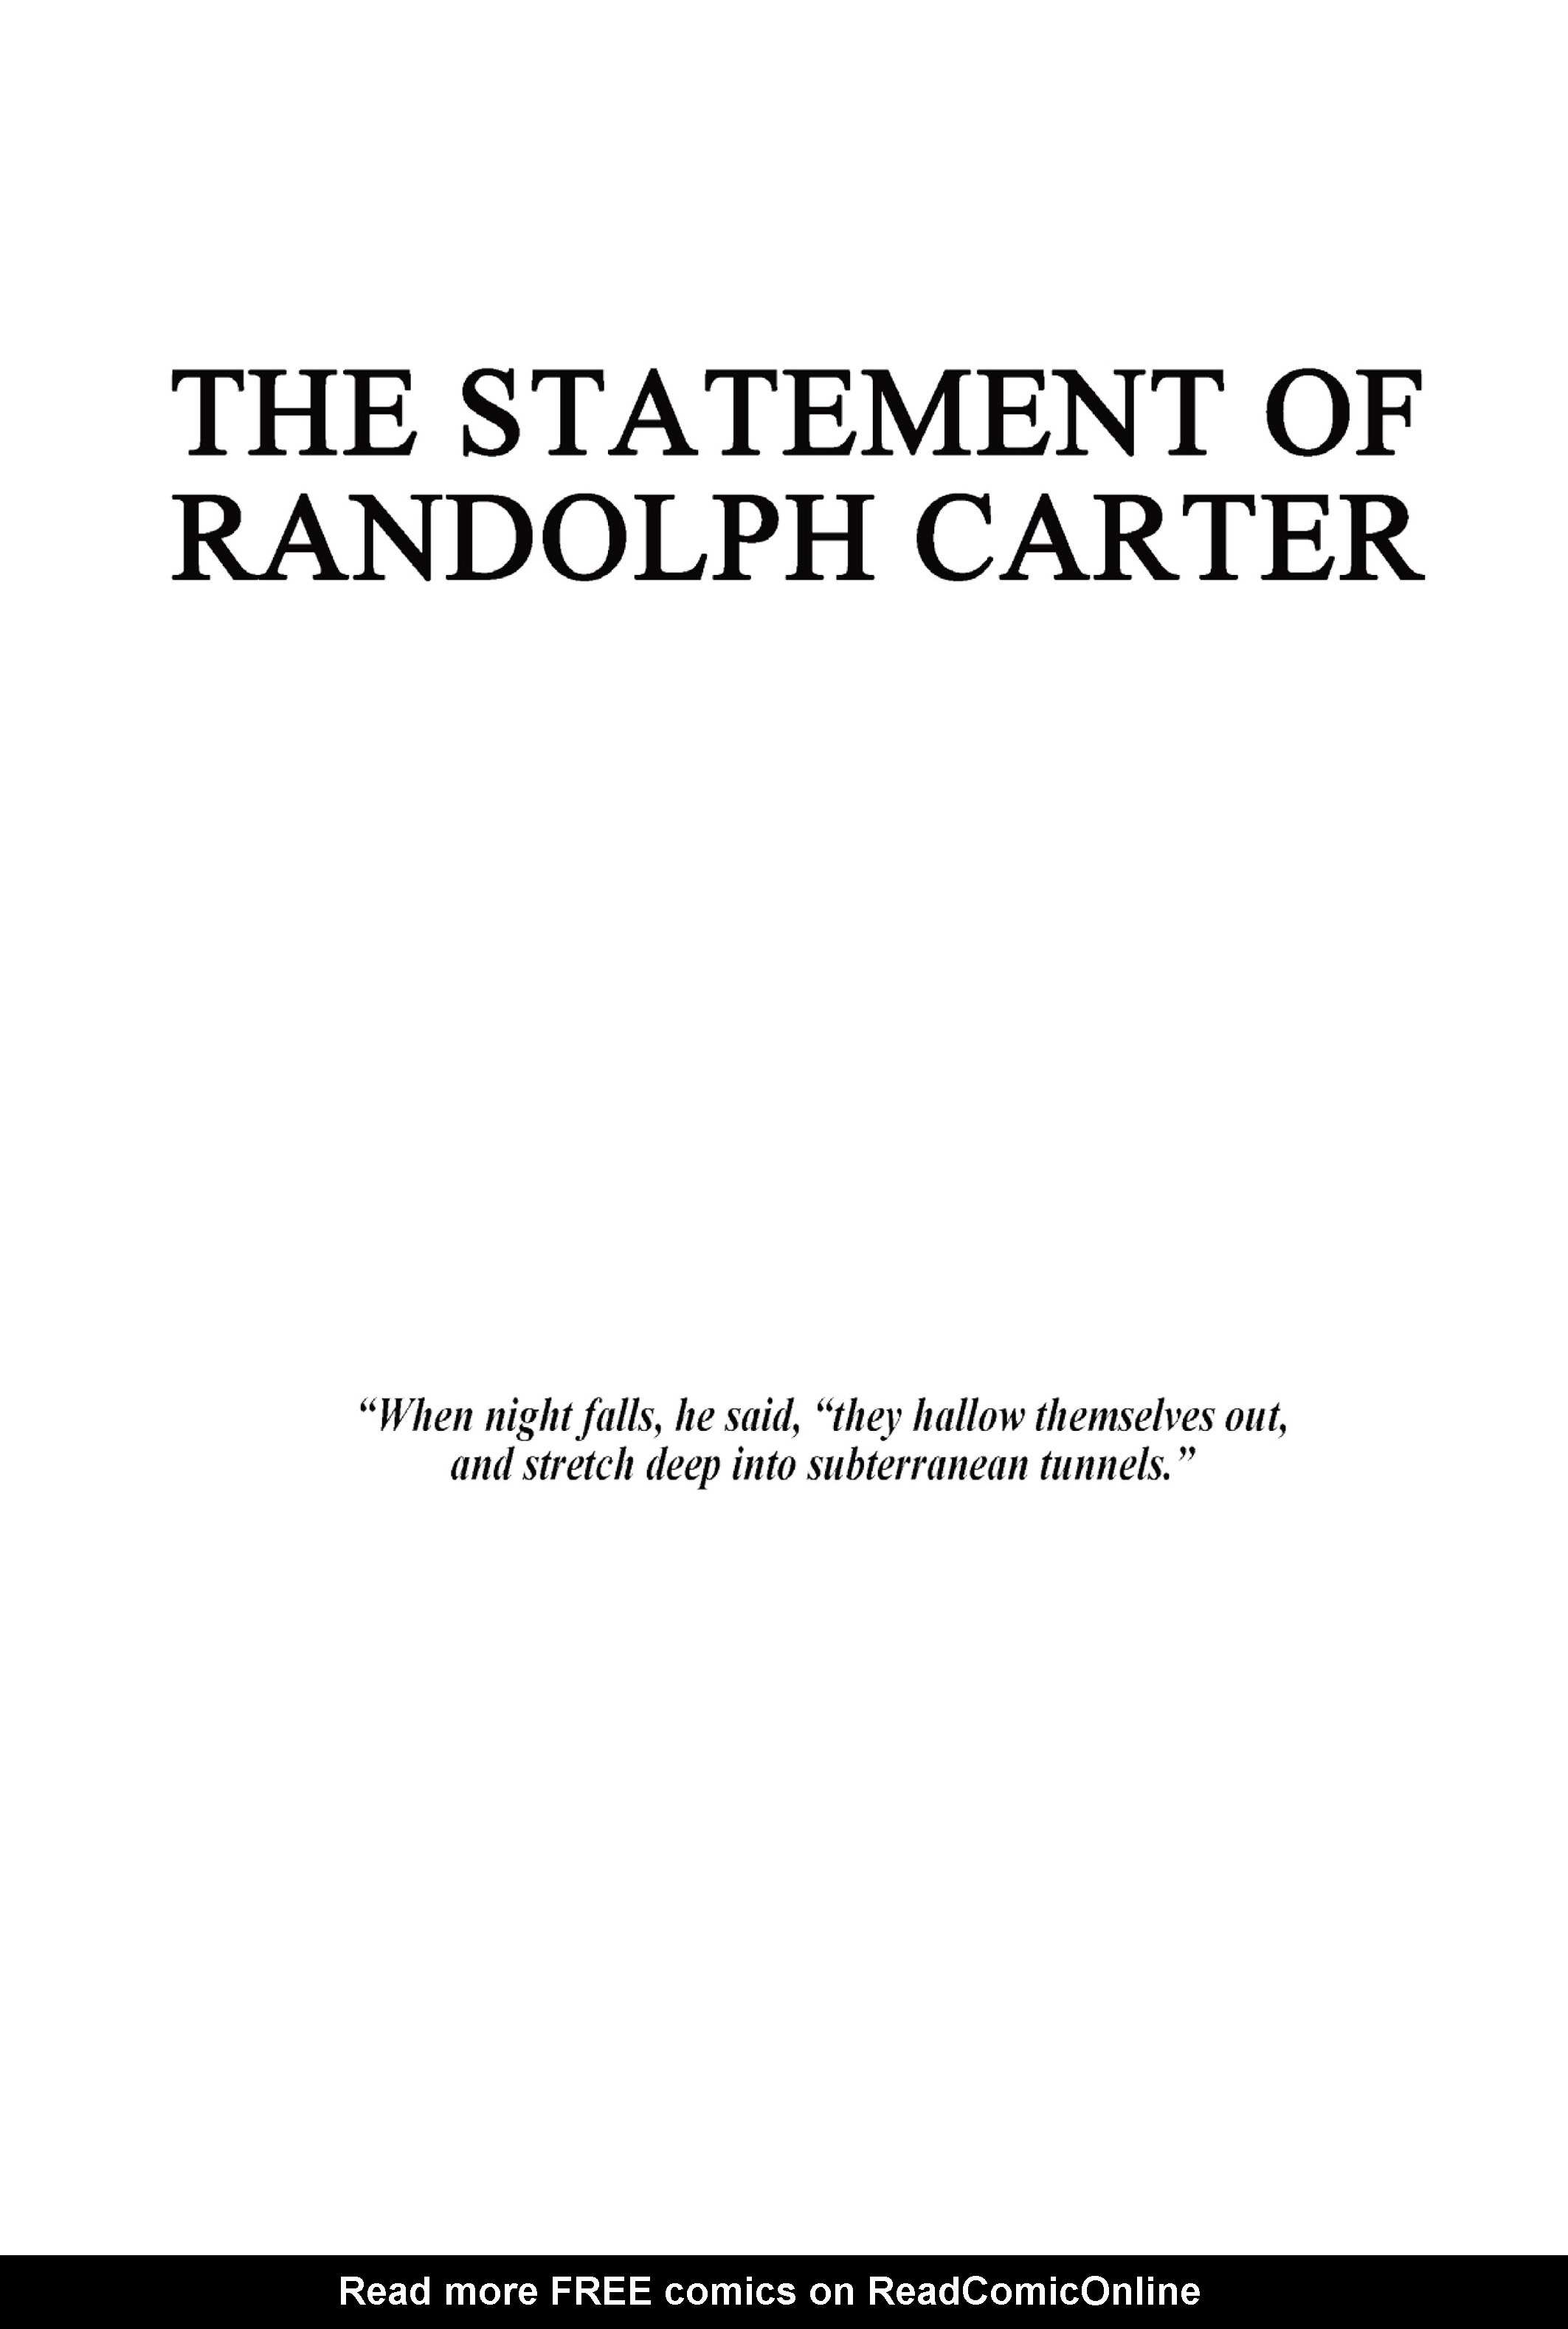 Read online Worlds of H.P. Lovecraft comic -  Issue # Issue The Statement of Randoph Carter - 2